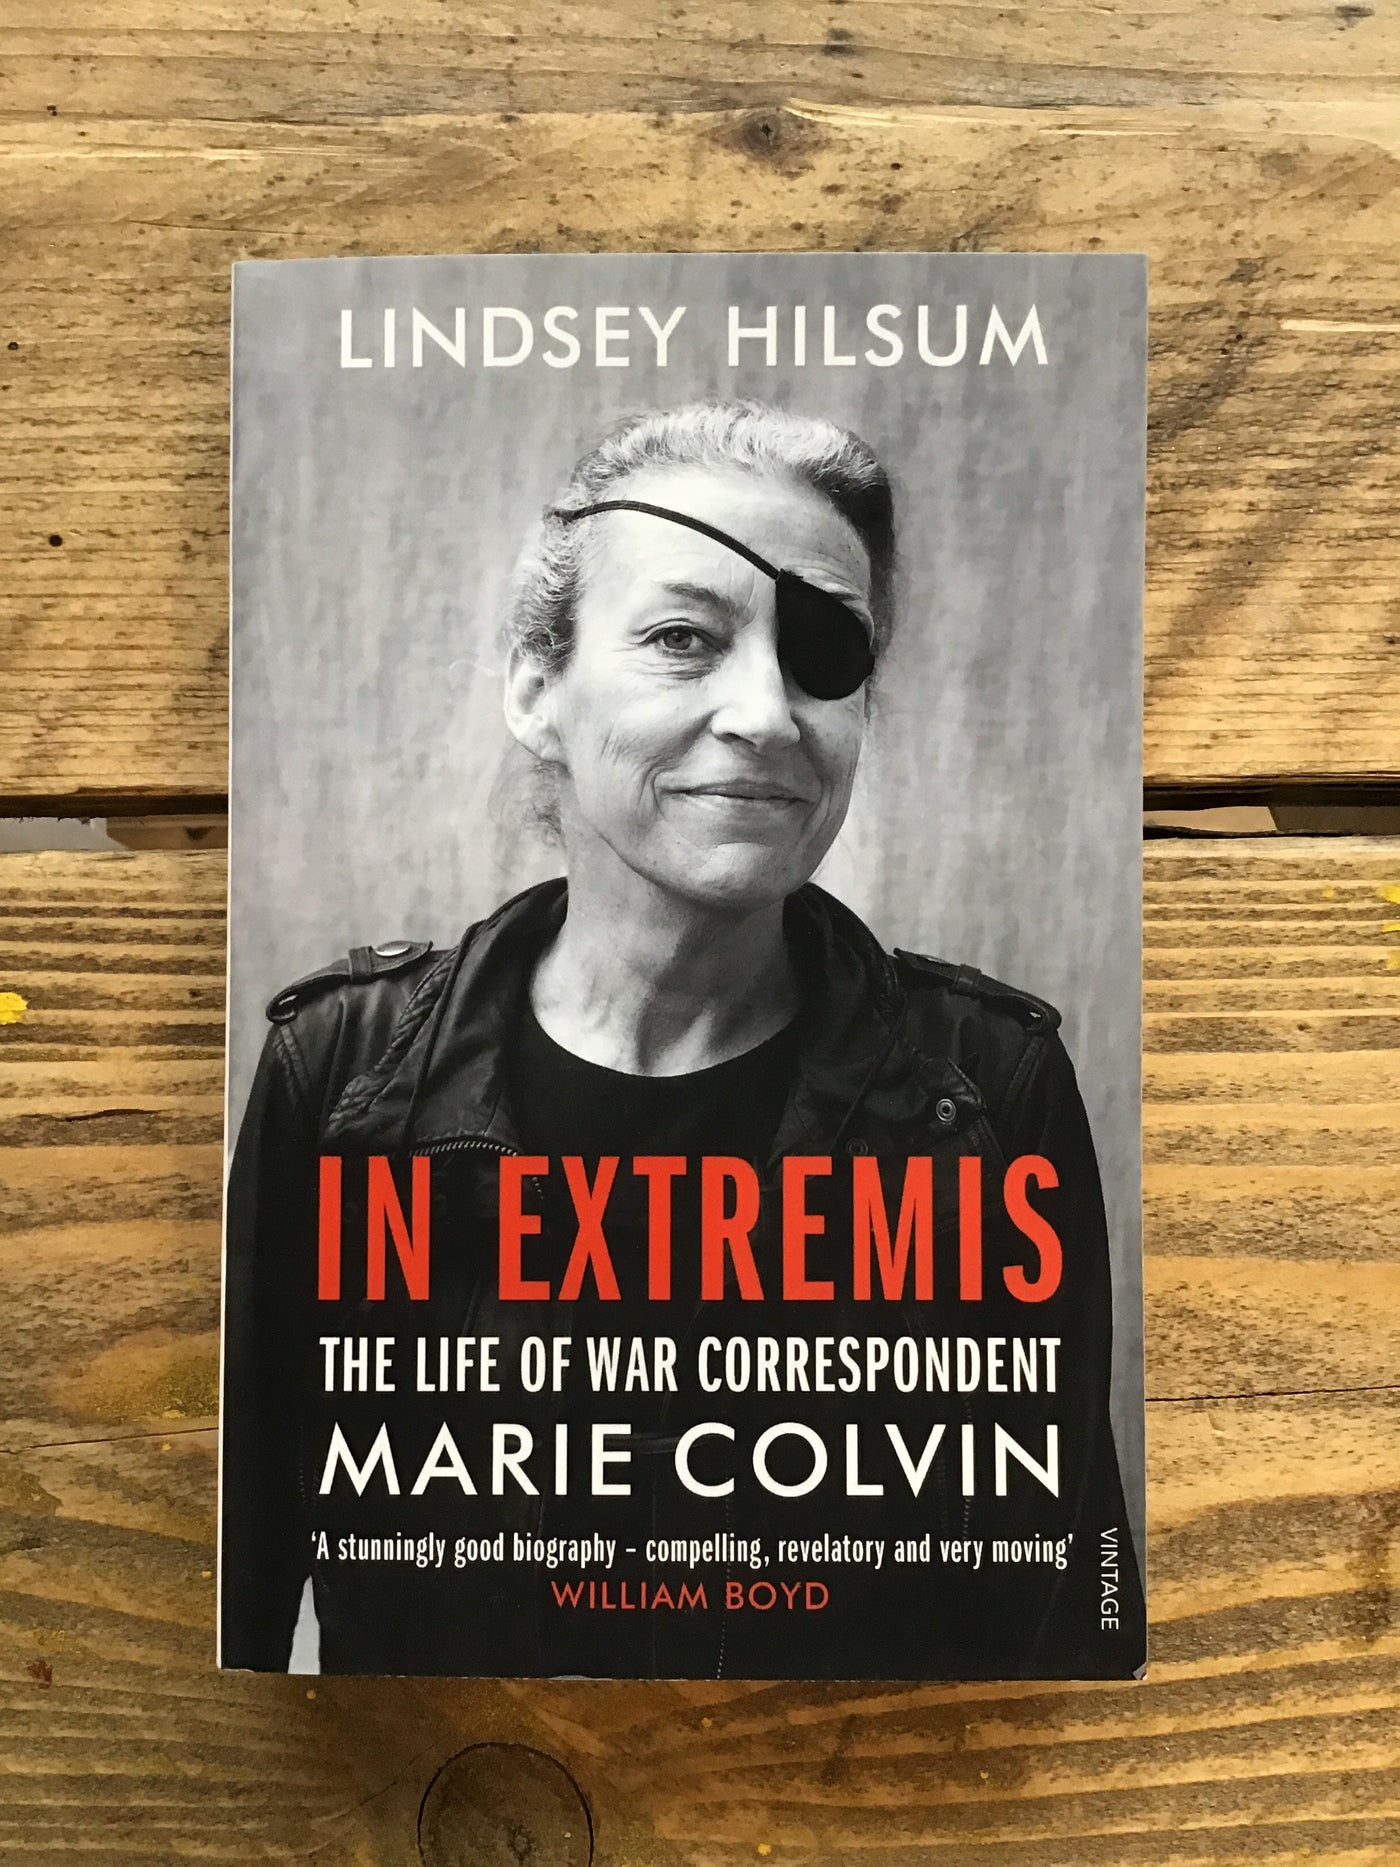 In Extremis, The Life of War Correspondent Marie Colvin